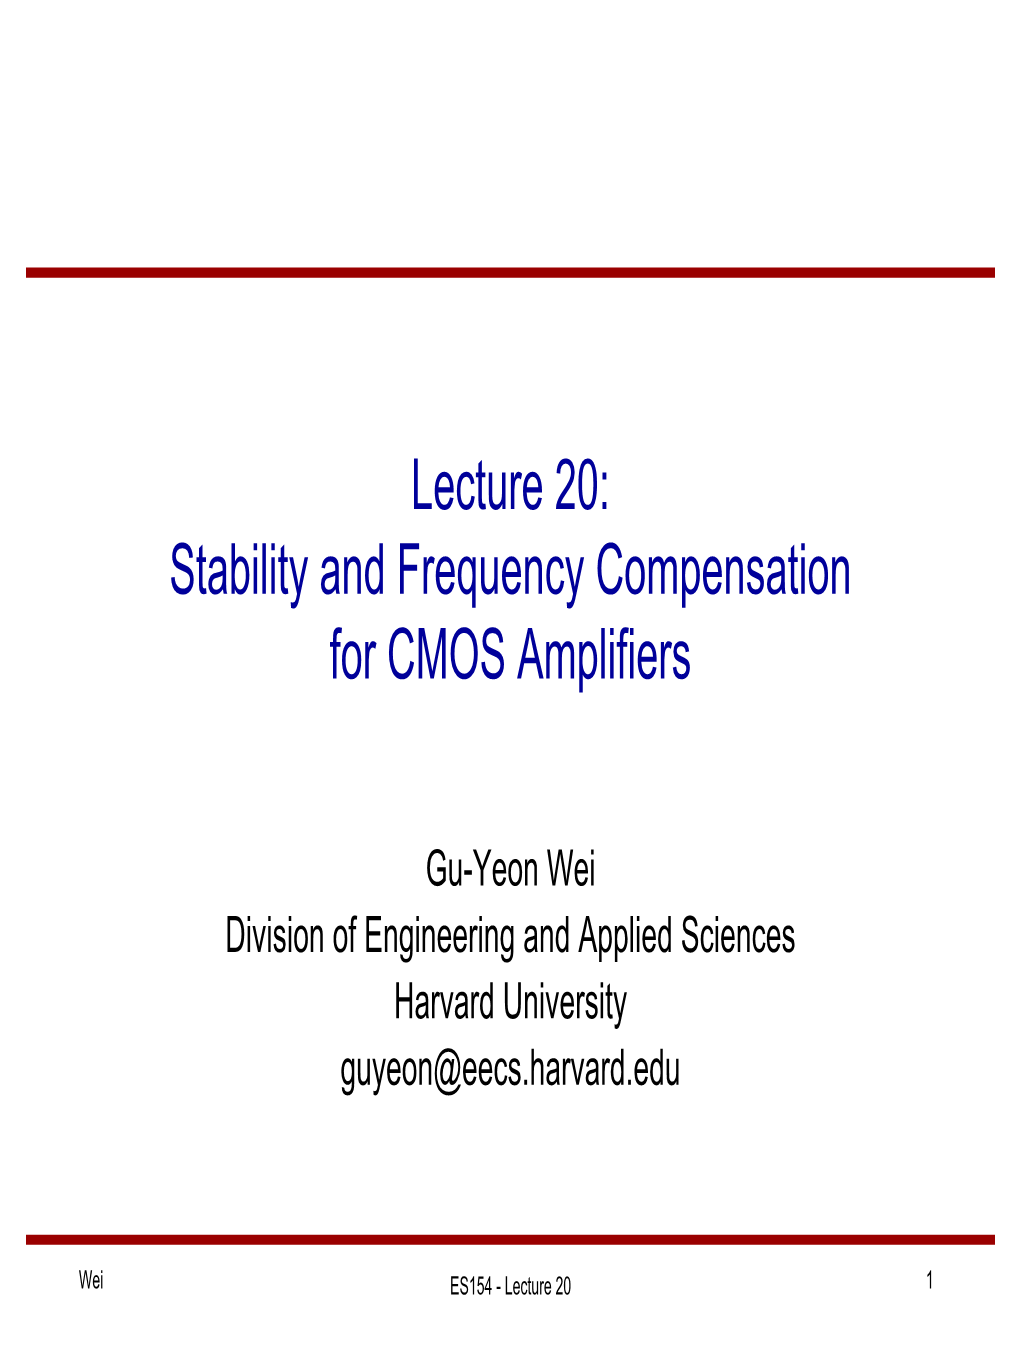 Lecture 20: Stability and Frequency Compensation for CMOS Amplifiers